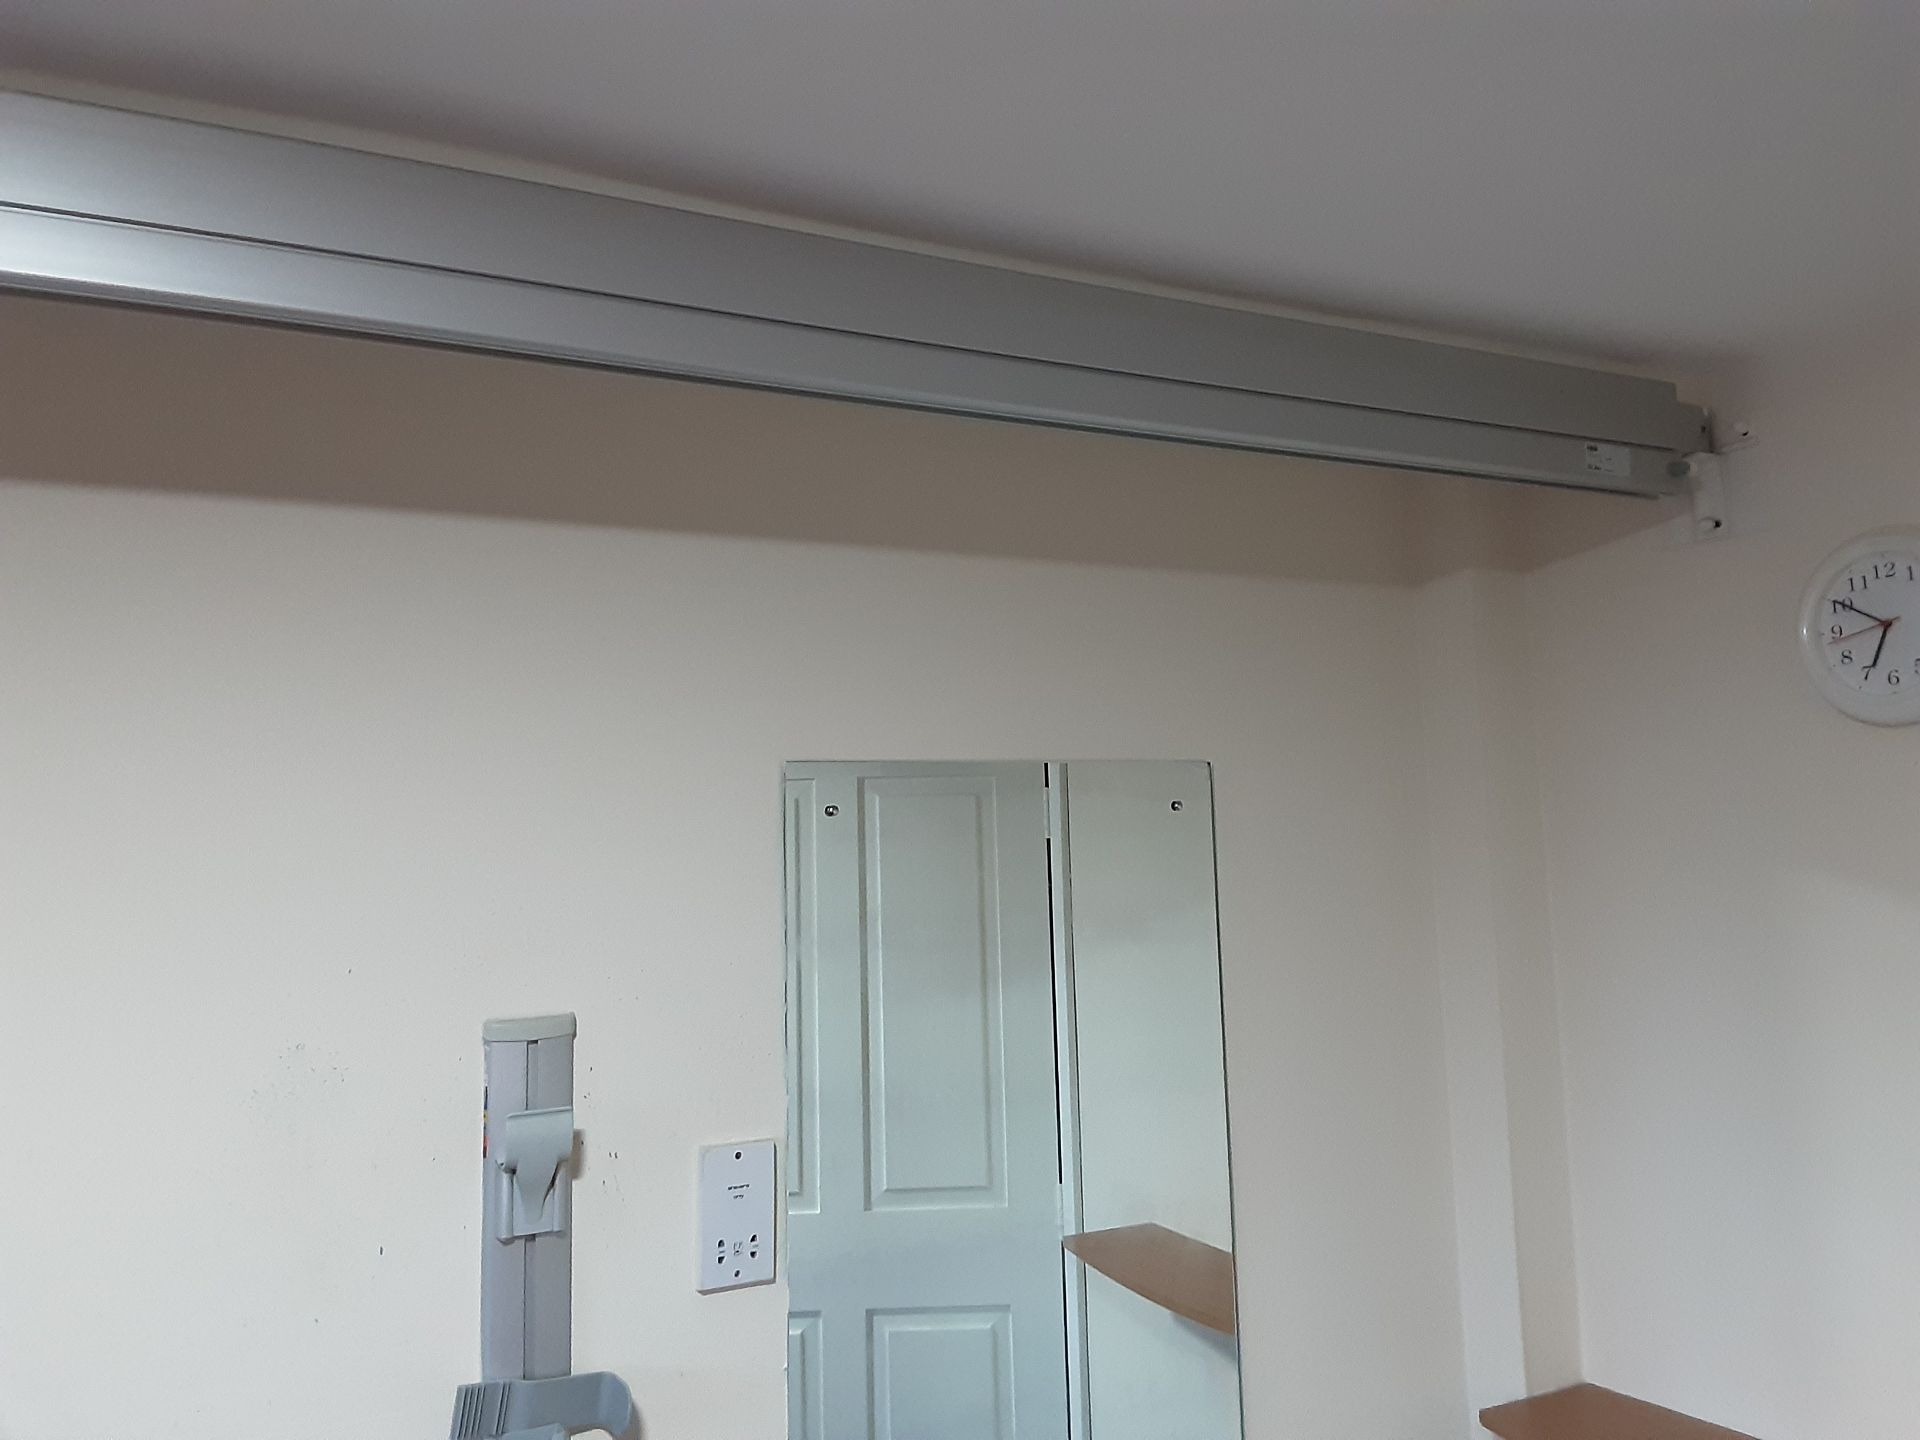 Likorall 242S R2R 200kg Patient Lift with KwikTrak Ceiling Rail System Serial No: 260865 - Image 4 of 10